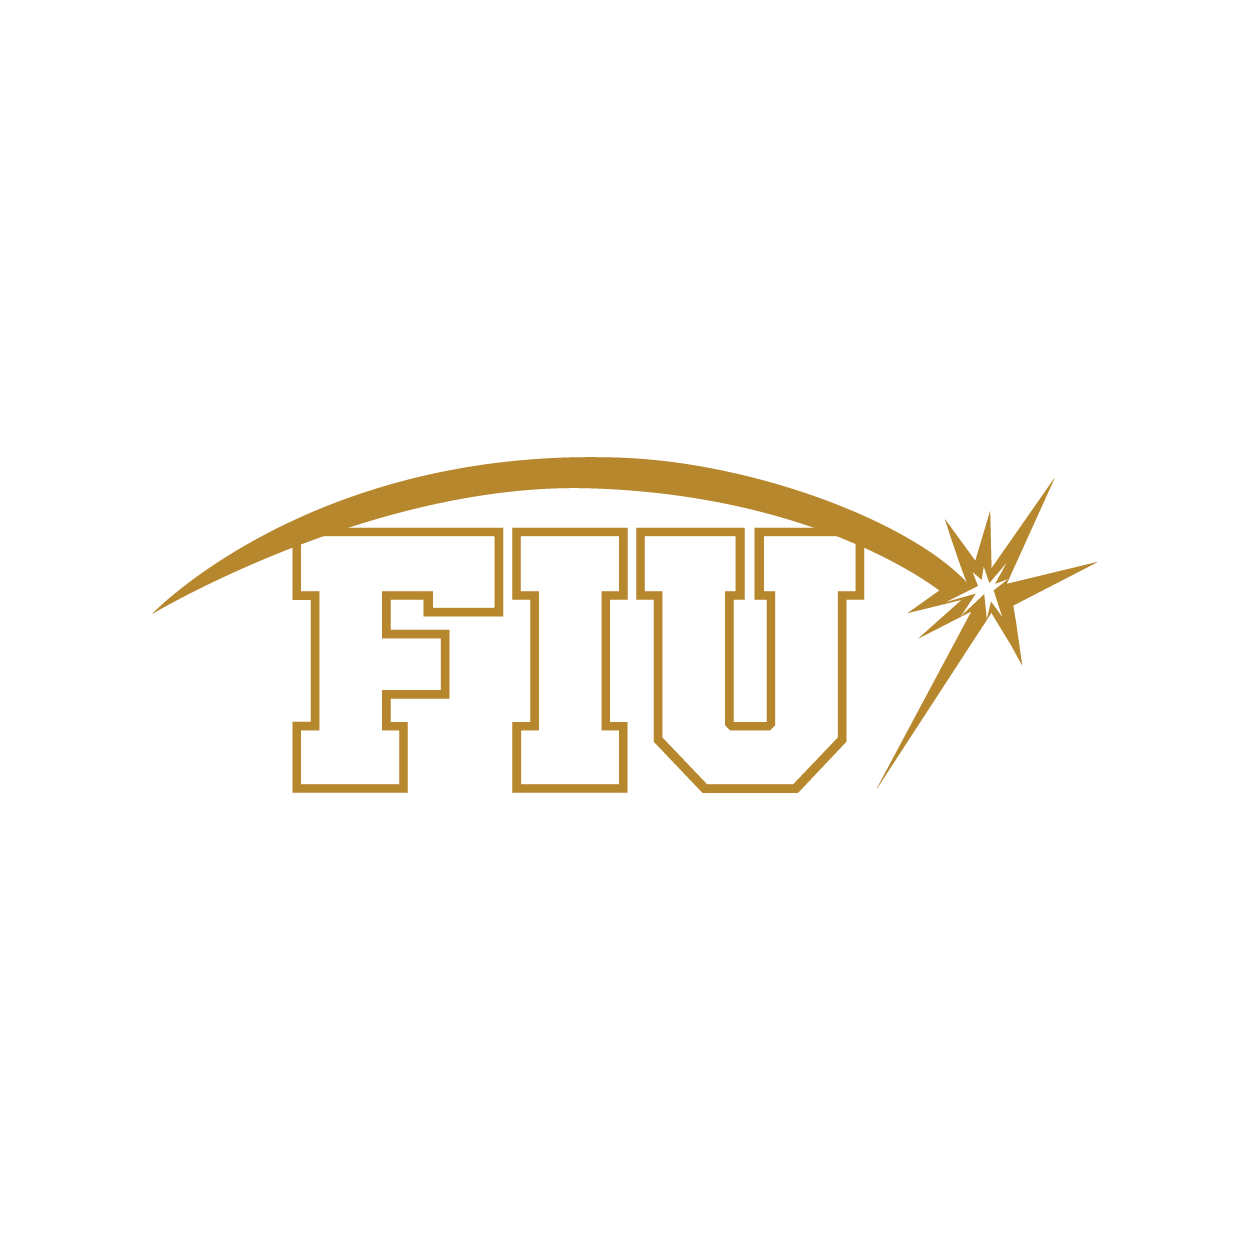 The pin for 2015 was a white FIU with a gold spark over it